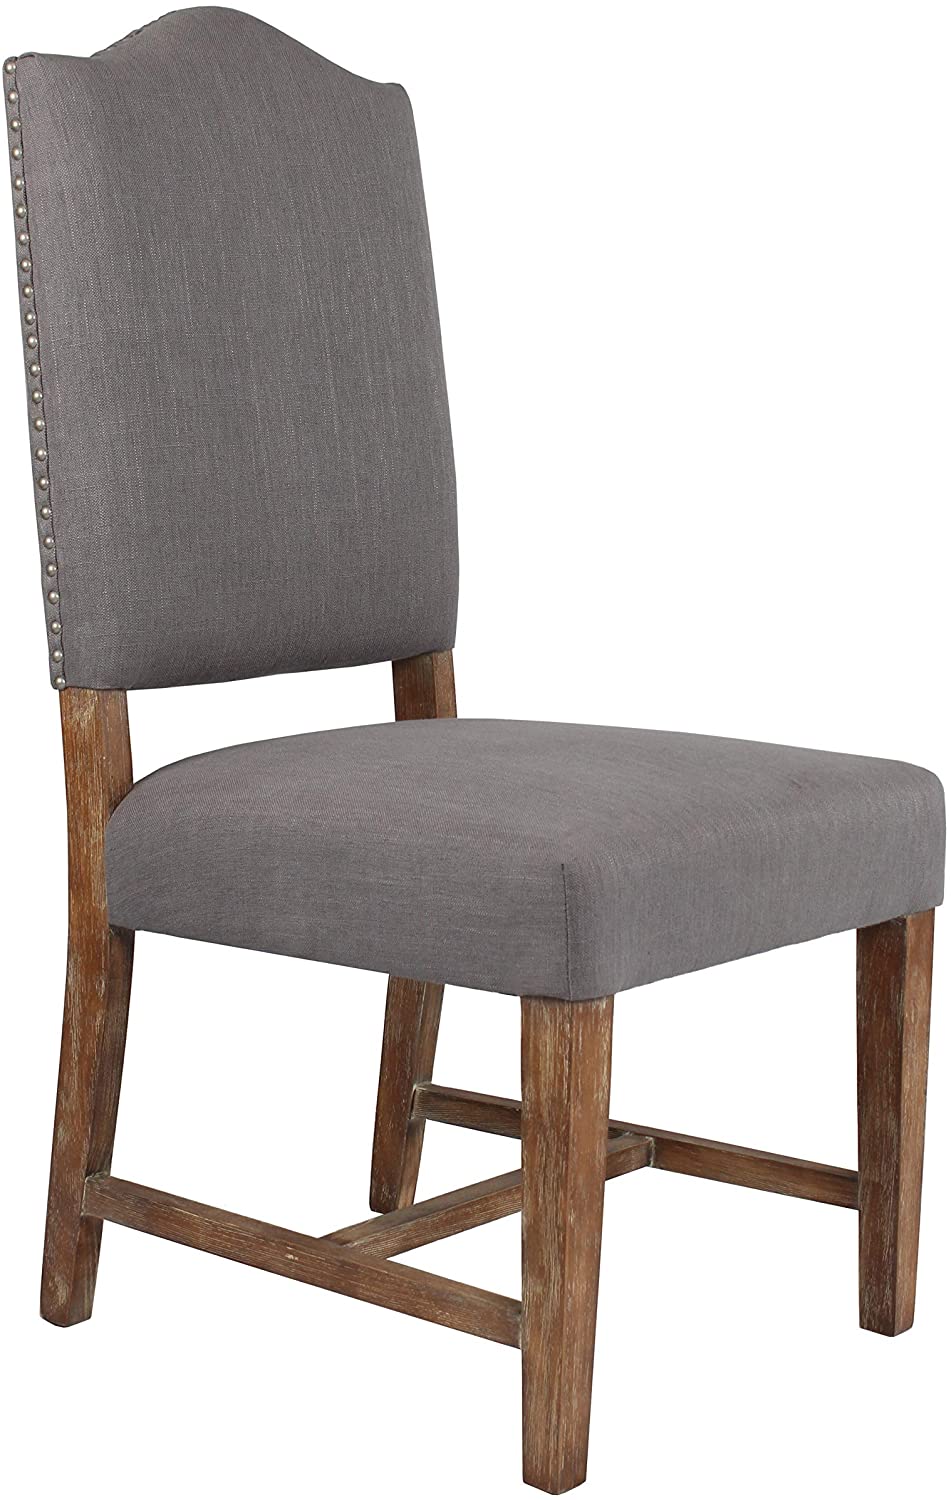 Cui Liu Grayson Upholstered Dining Kitchen Chair in Dark Grey Linen Fabric (Set of 2)